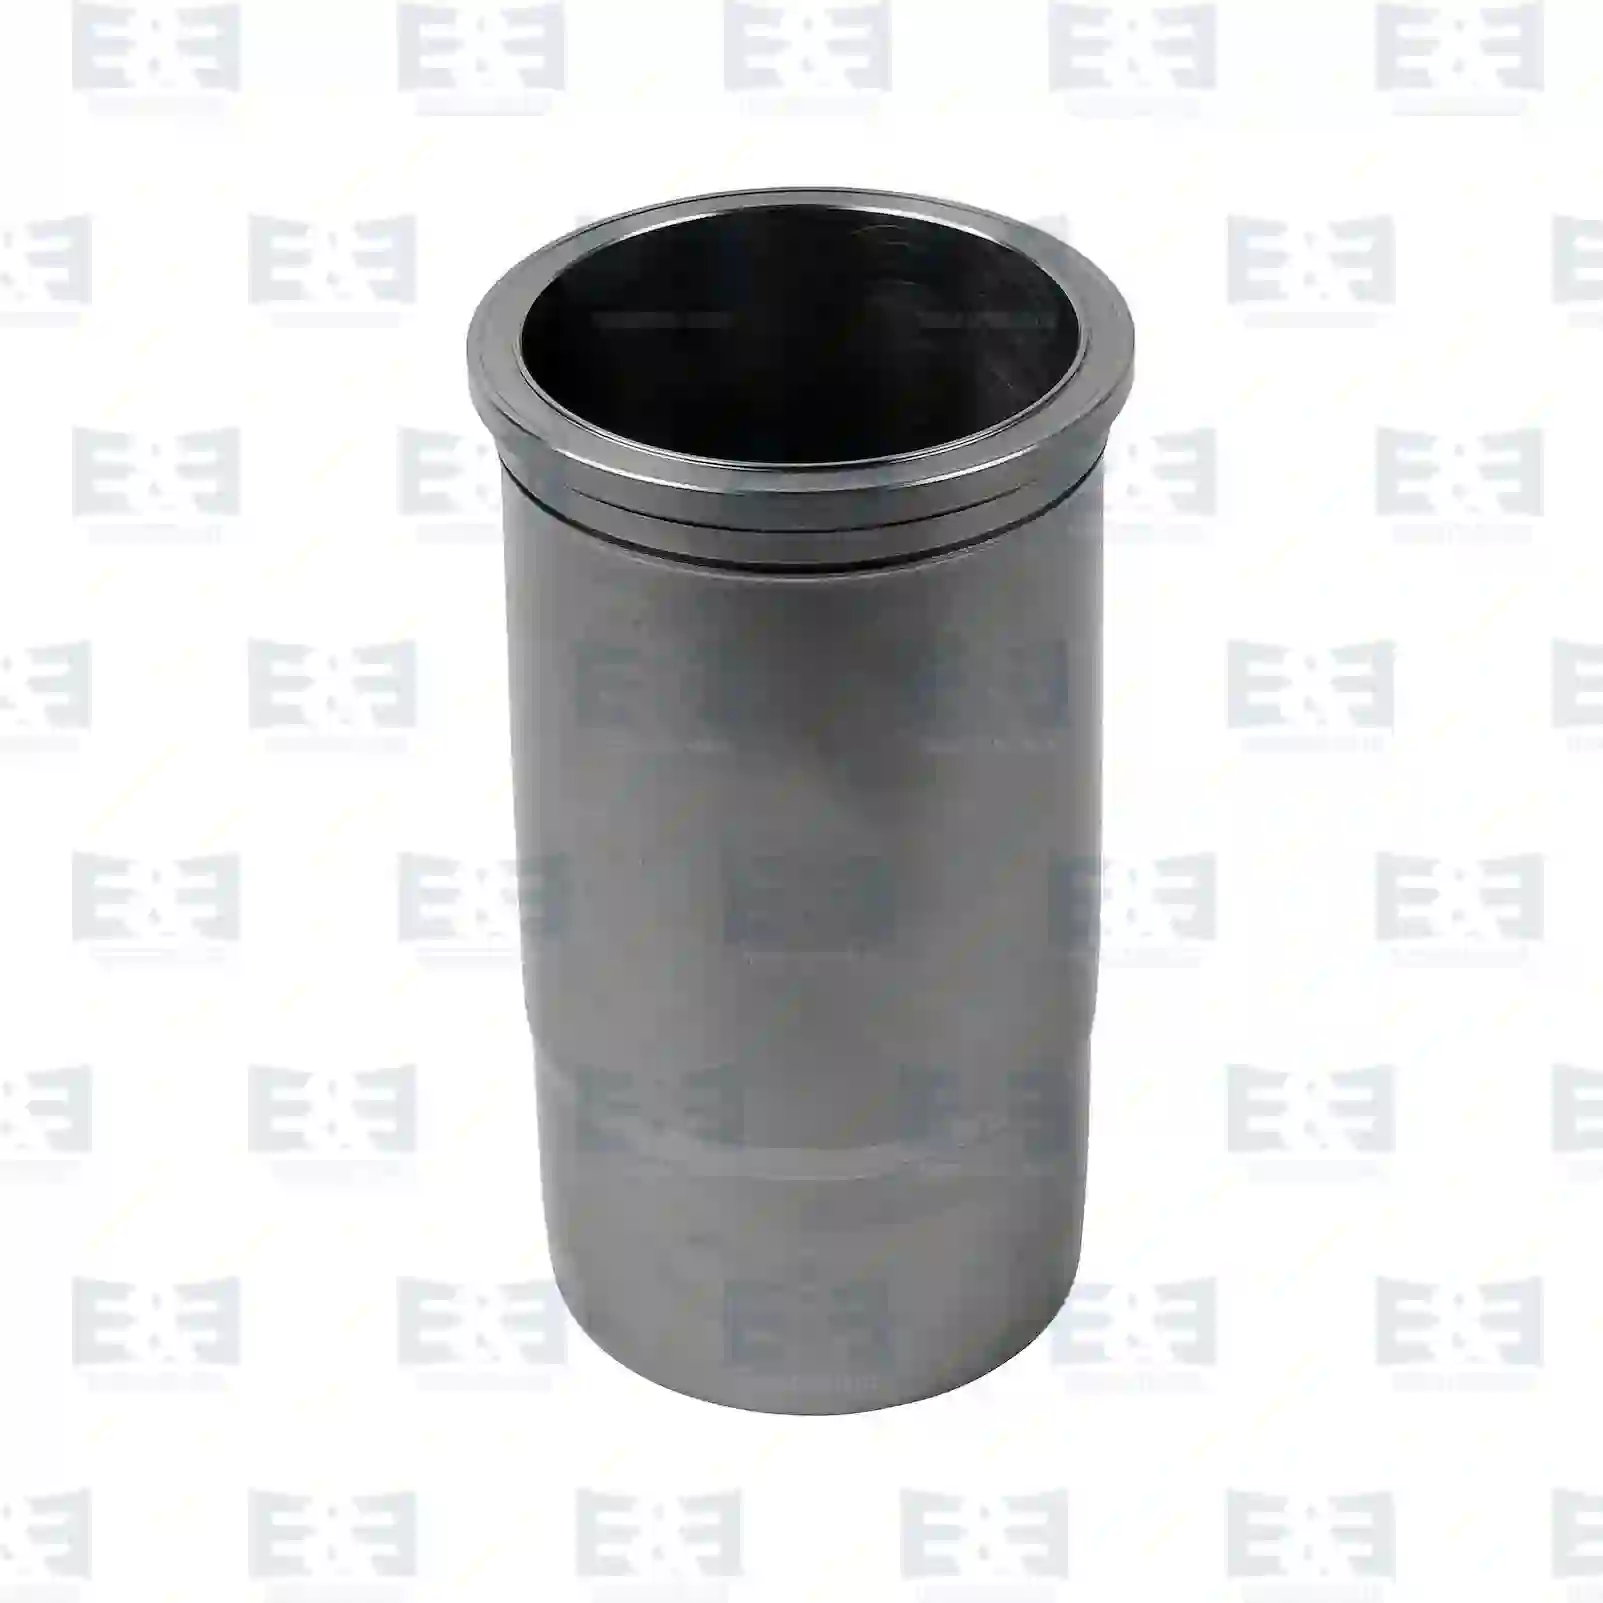 Cylinder liner, without seal rings, 2E2208323, 5010359561, 7421106964, , ||  2E2208323 E&E Truck Spare Parts | Truck Spare Parts, Auotomotive Spare Parts Cylinder liner, without seal rings, 2E2208323, 5010359561, 7421106964, , ||  2E2208323 E&E Truck Spare Parts | Truck Spare Parts, Auotomotive Spare Parts